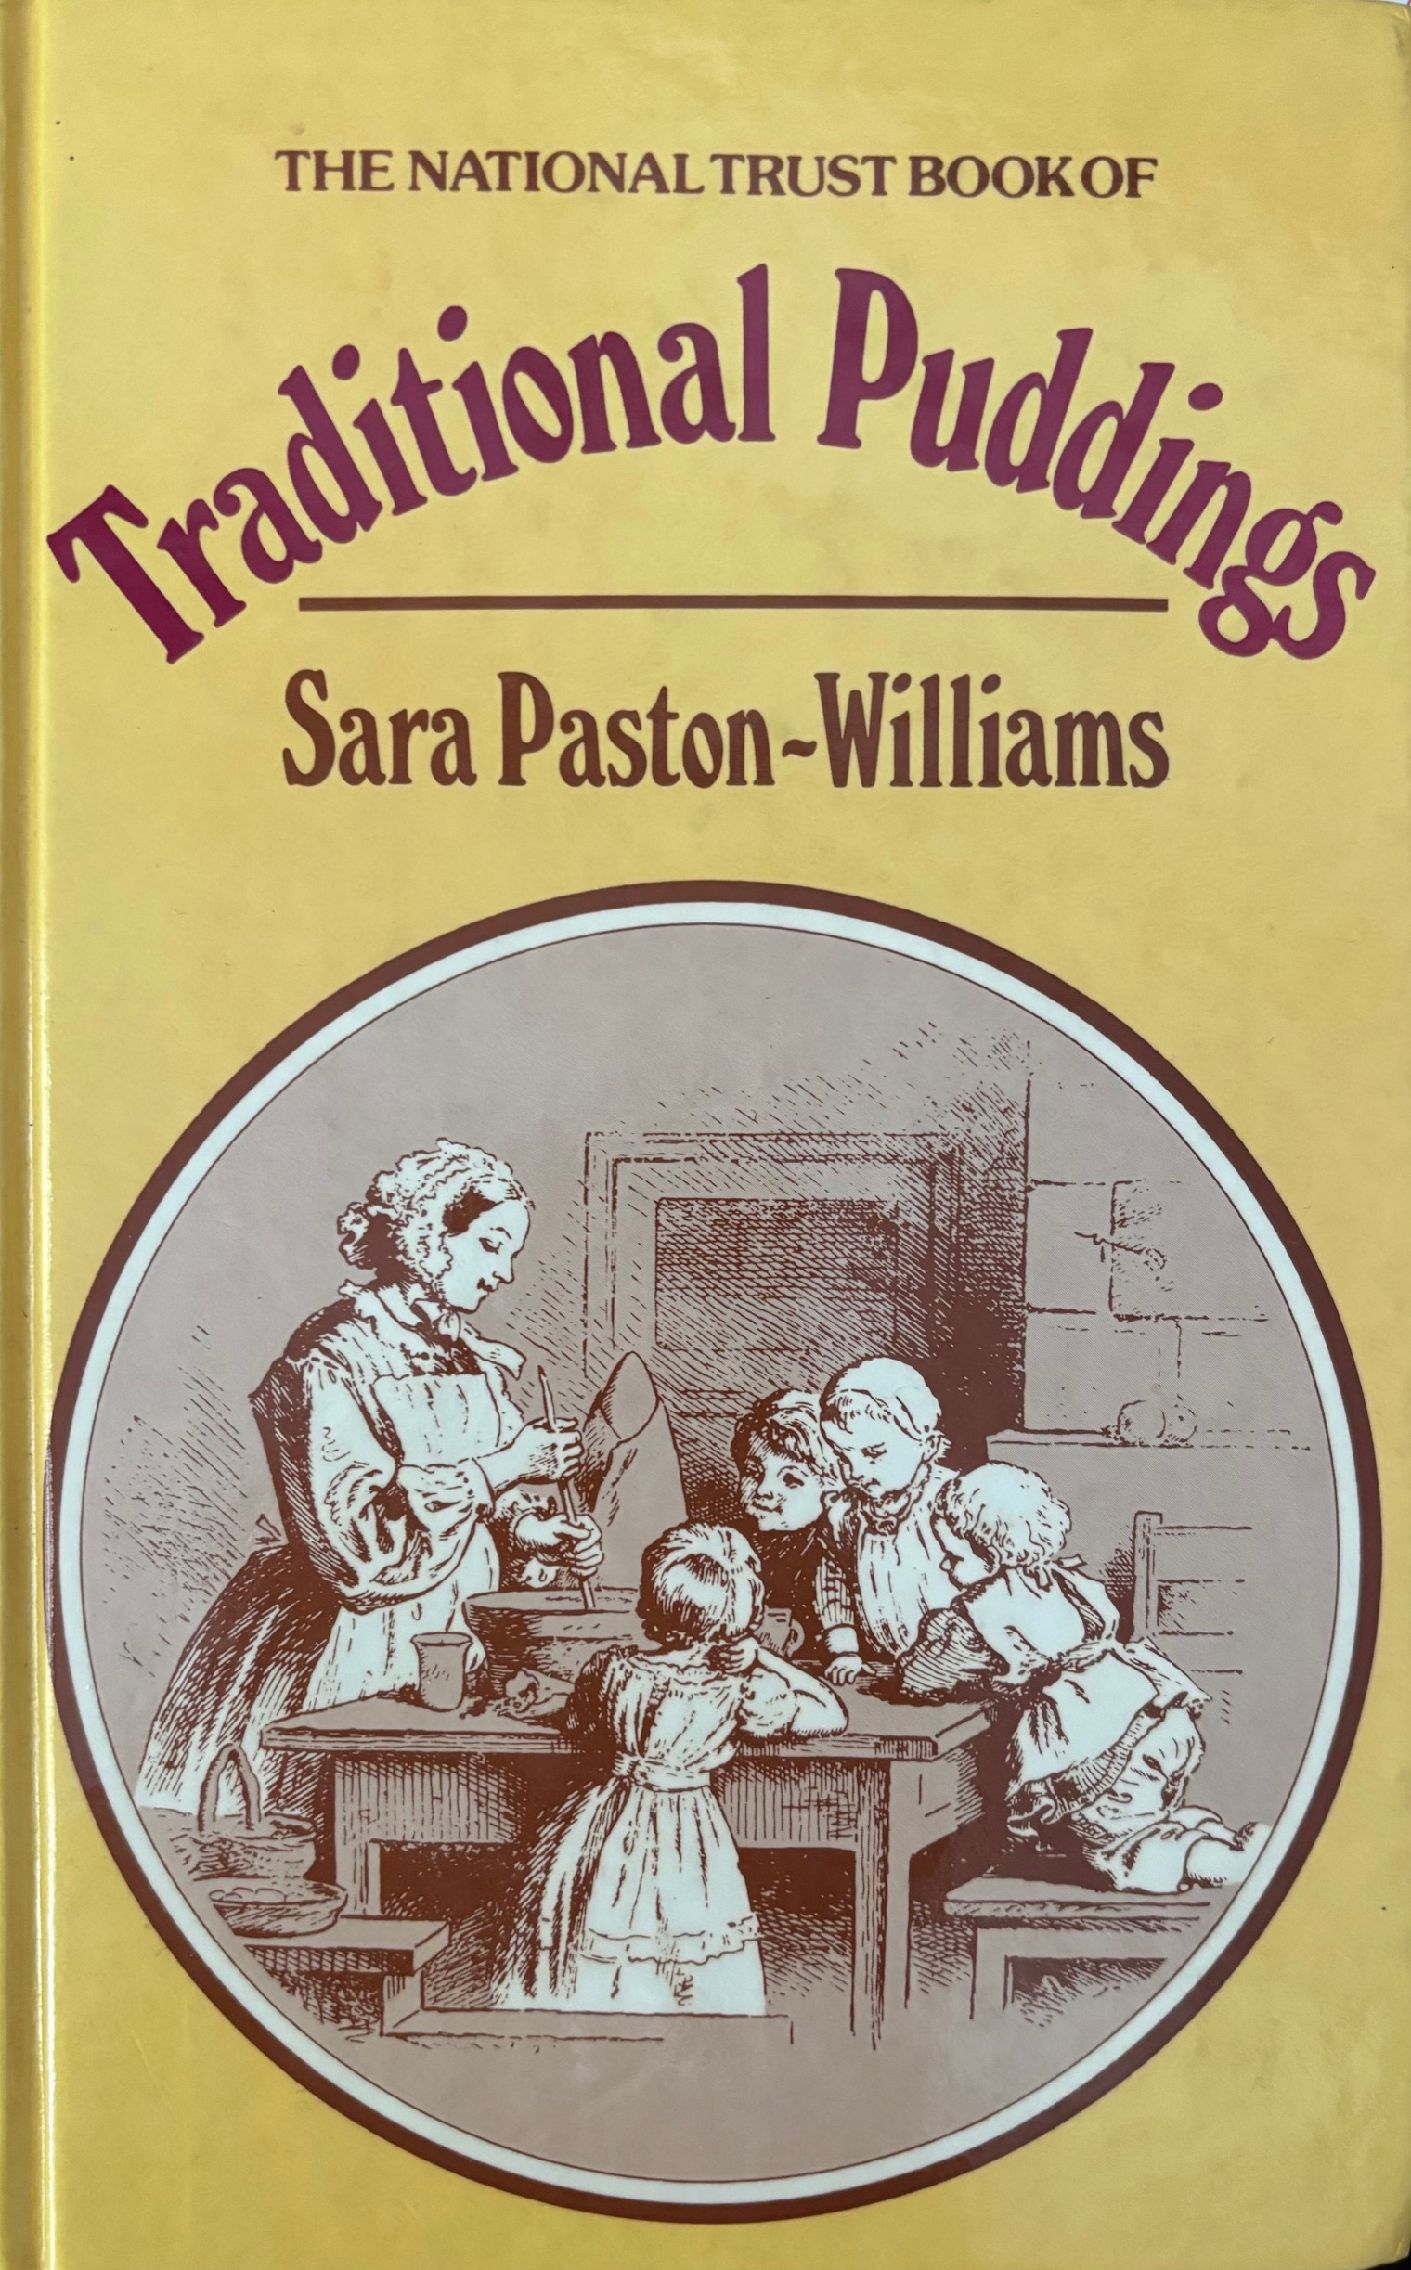 (English) Sara Paston-Williams. The National Trust Book of Traditional Puddings